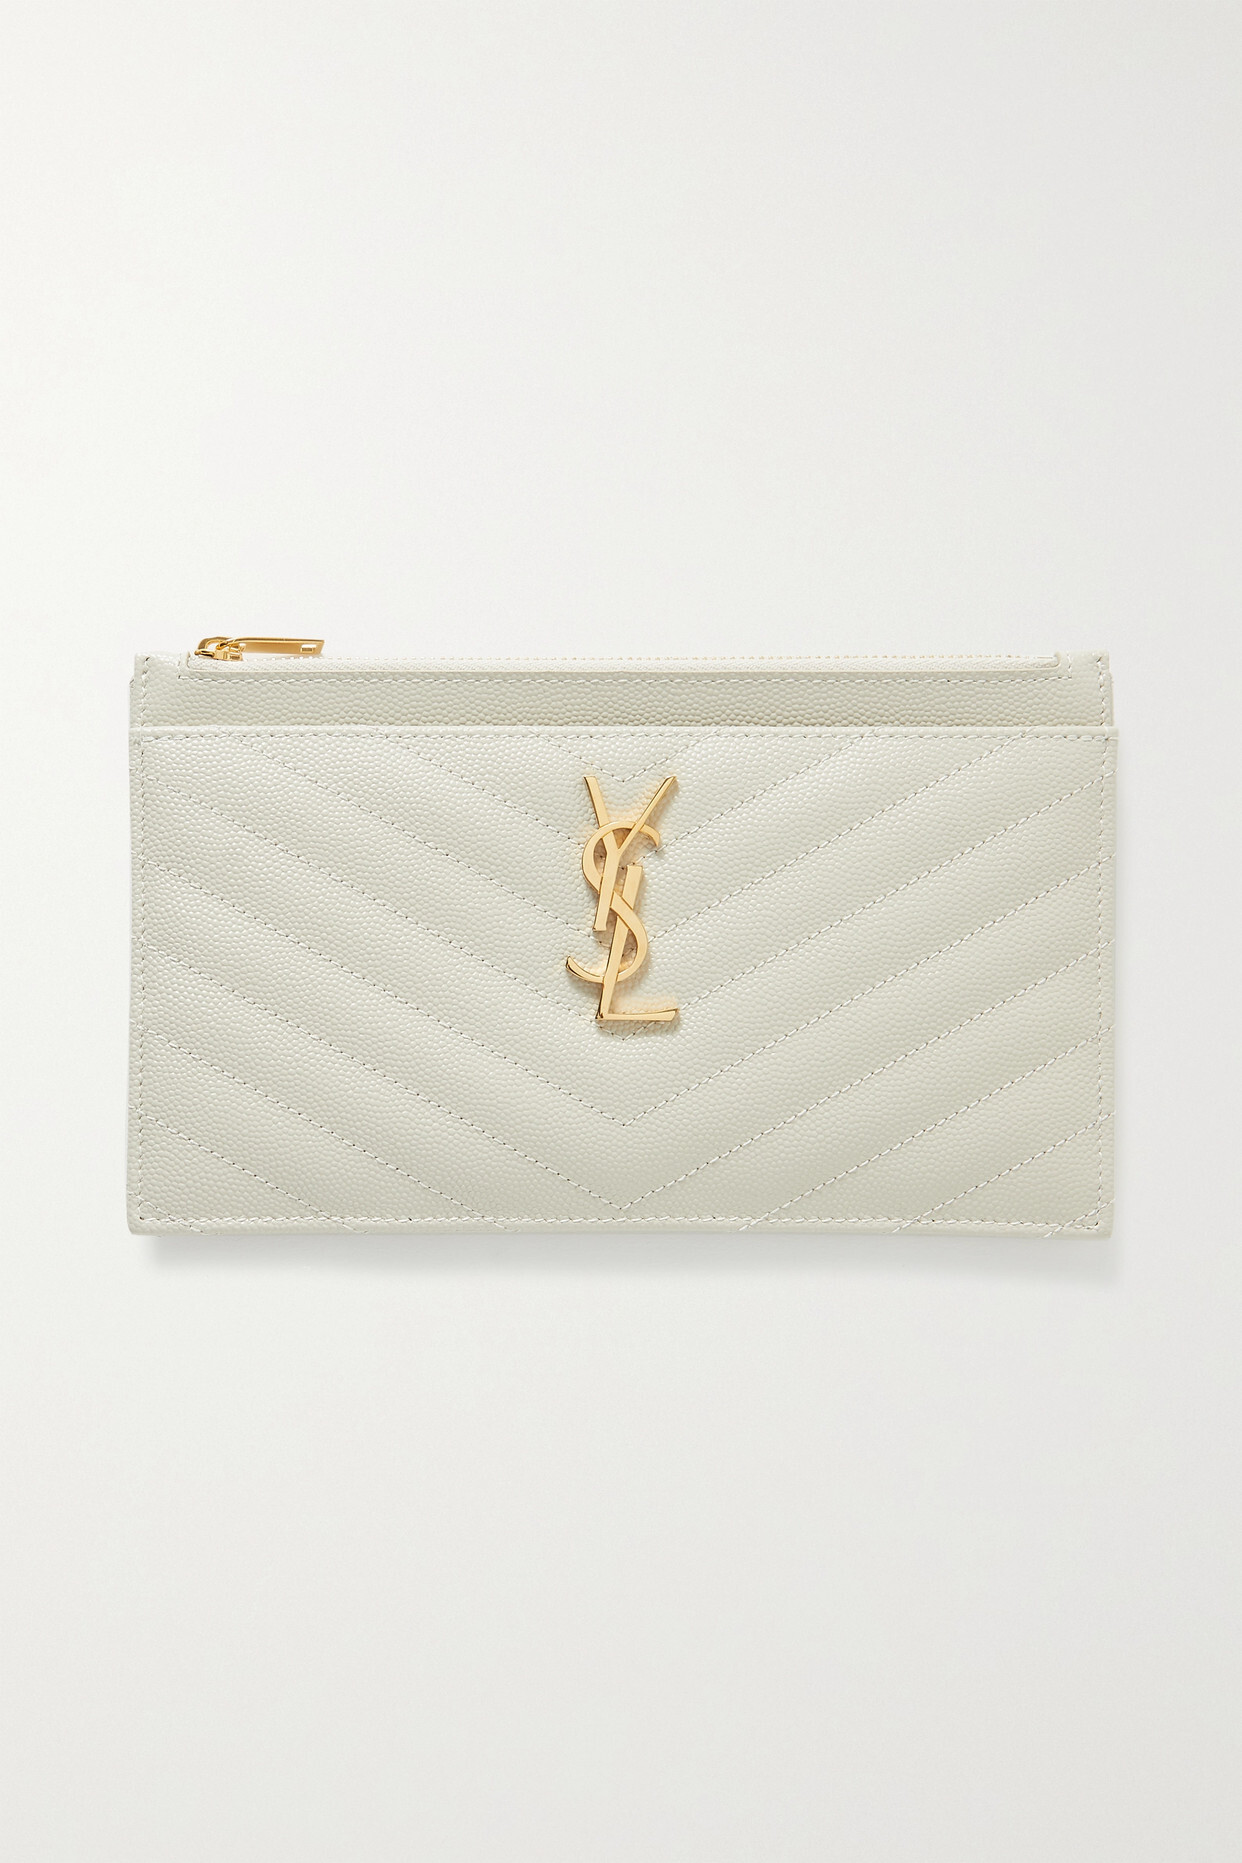 SAINT LAURENT - Monogramme Quilted Textured-leather Pouch - Off-white